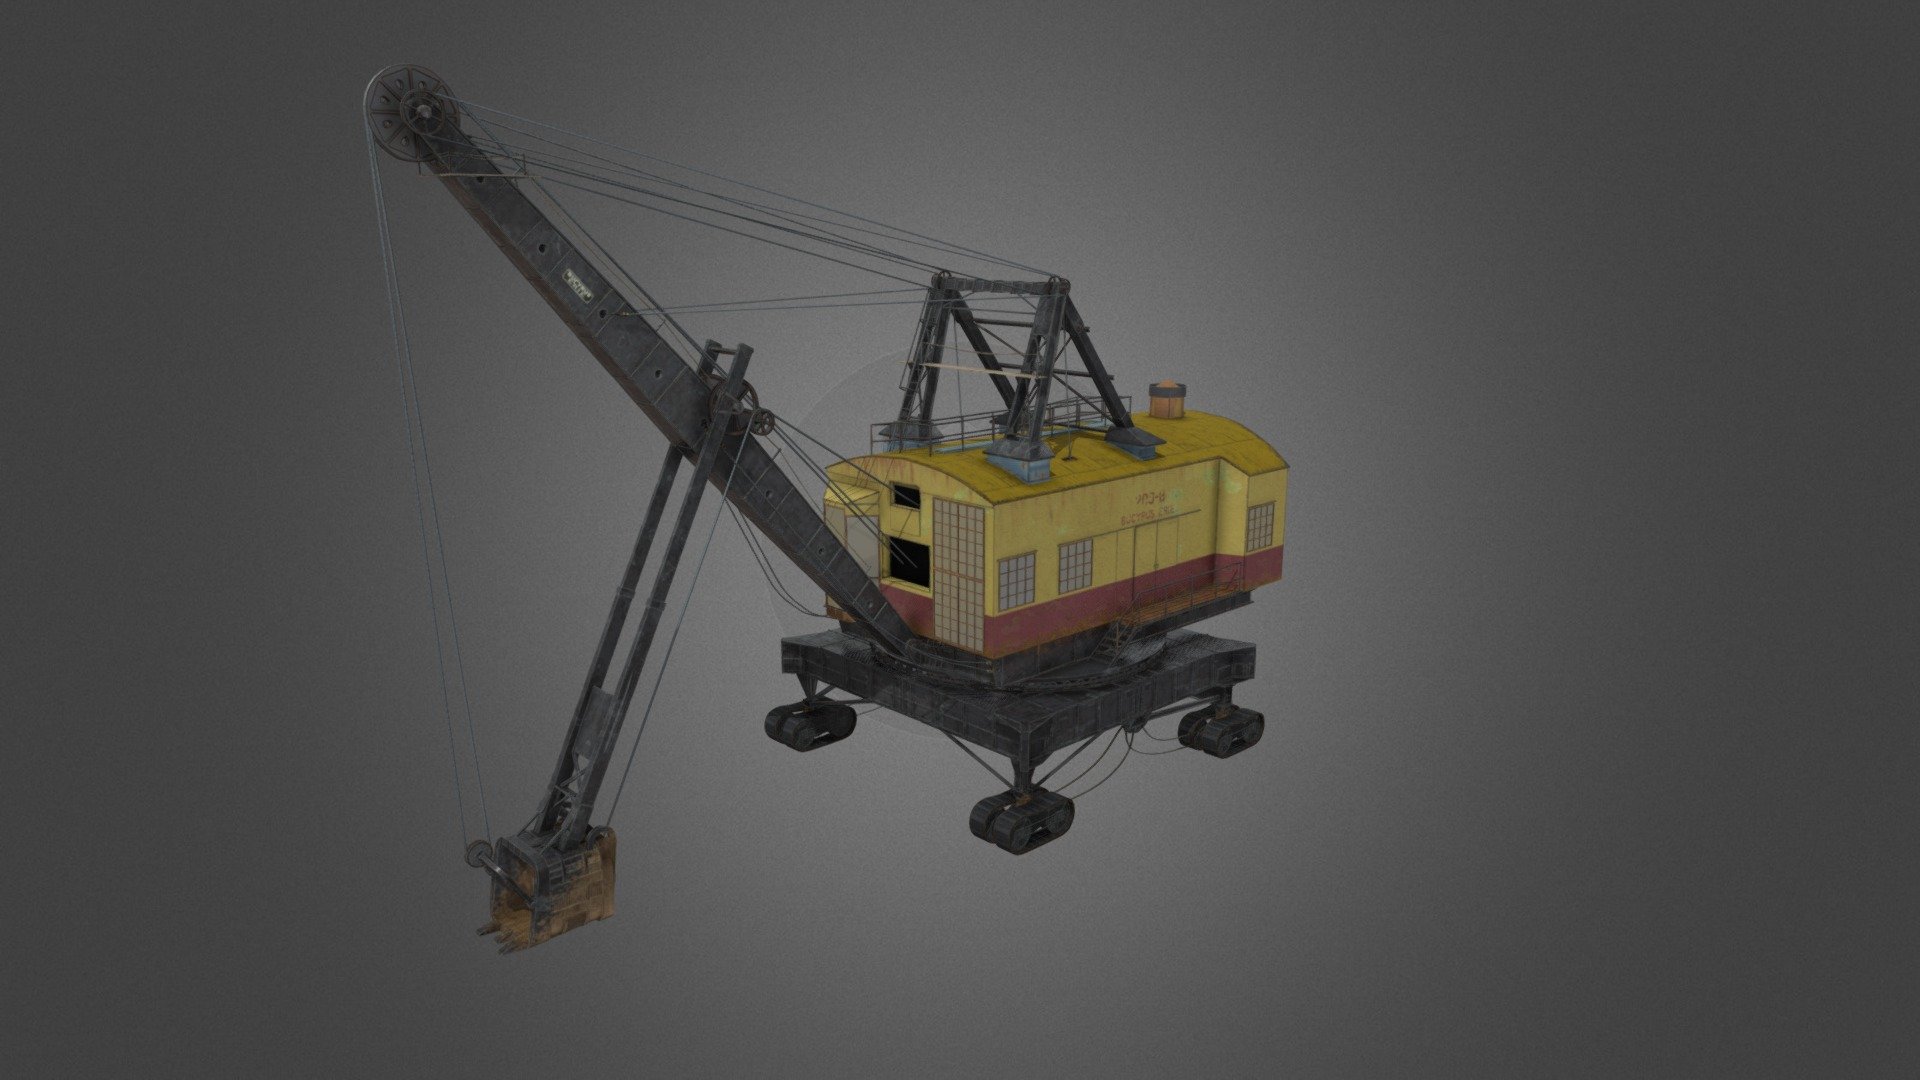 Model of bucyrus erie model 200b. Behemoth of a shovel. Textures on the actual model are downscaled to fit the requirements to fit the upload under 50MB. Full sized textures are included in additional files and range from 1-4K in details. Fully animated including rollers and pulleys using armatures 3d model